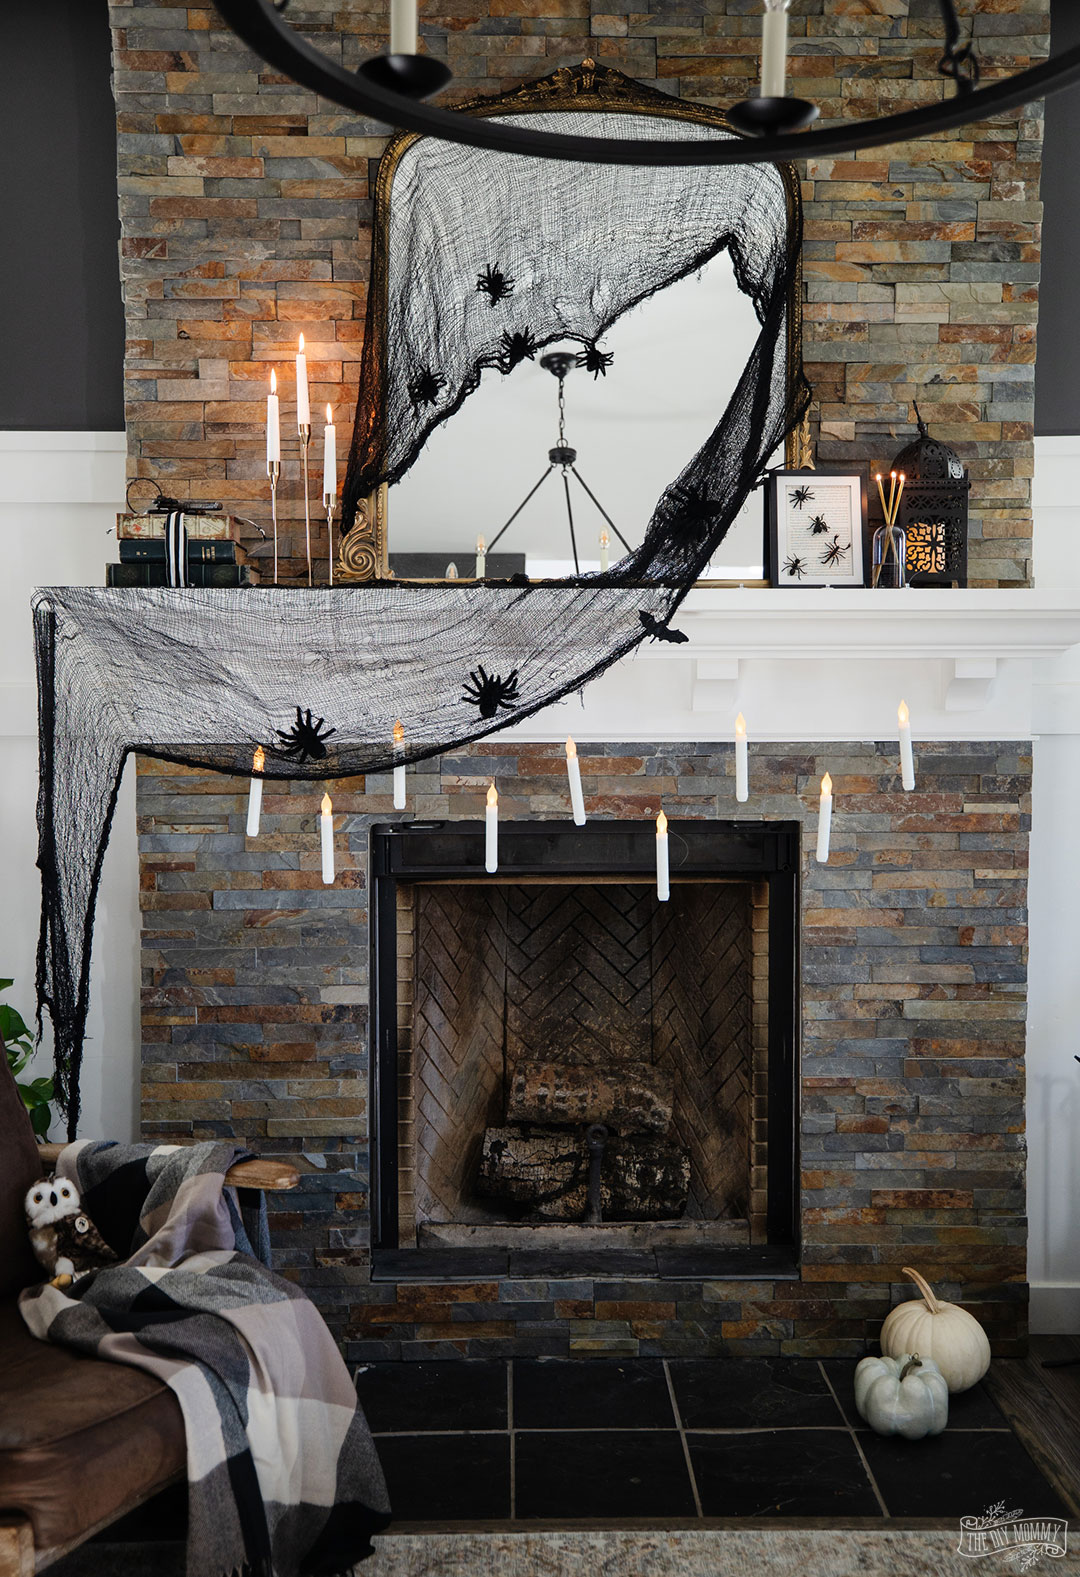 Harry Potter inspired mantle decorated with a mirror draped in black fabric, spiders, candlesticks and some floating candles. 